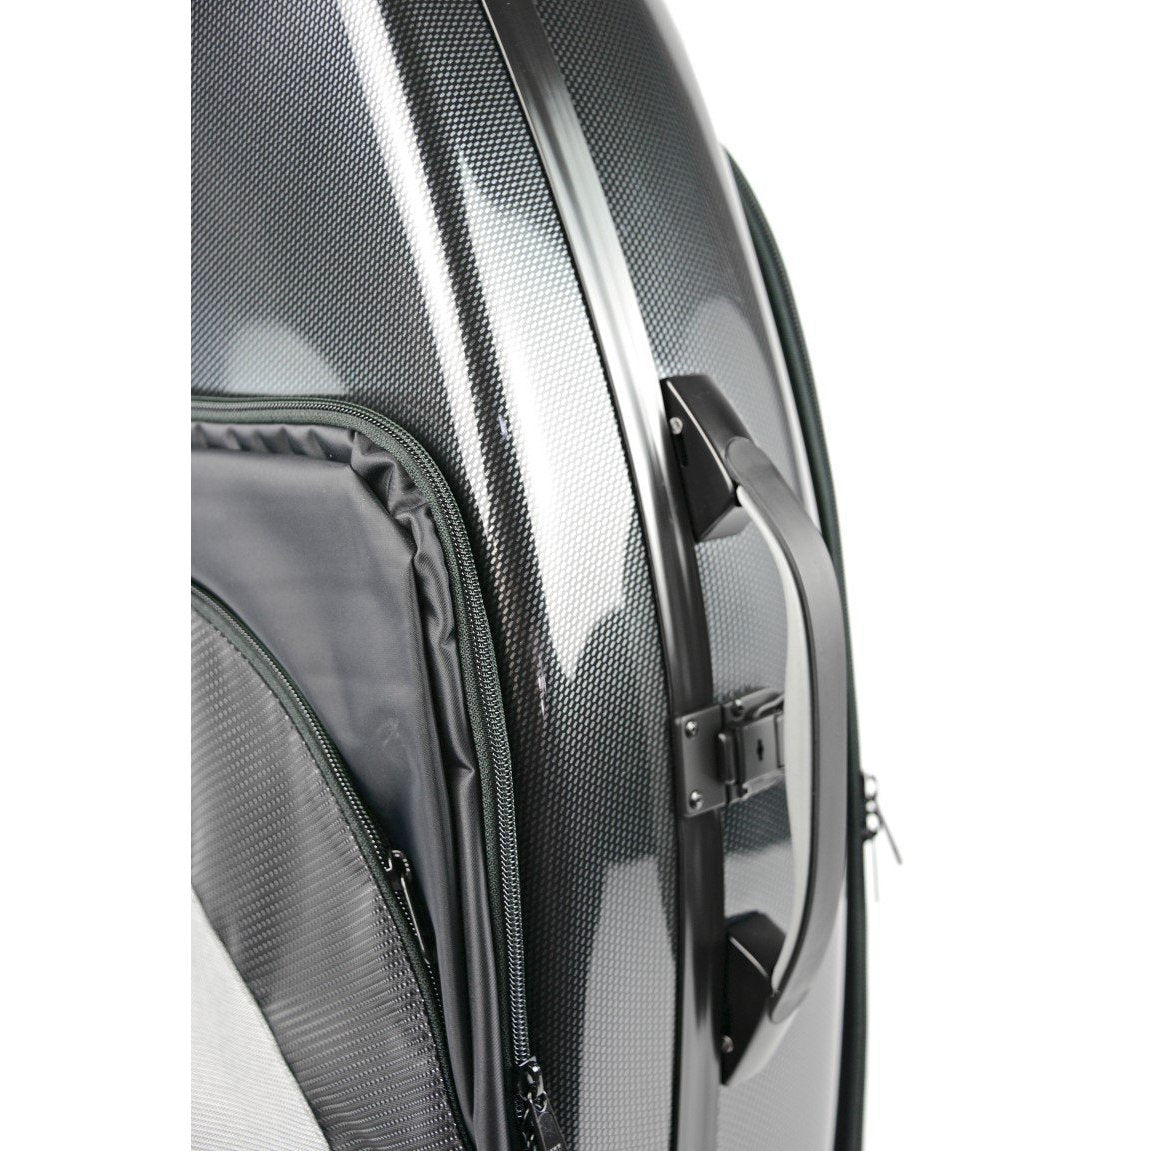 Bam - Hightech Tenor Saxophone Cases with Pocket-Case-Bam-Music Elements